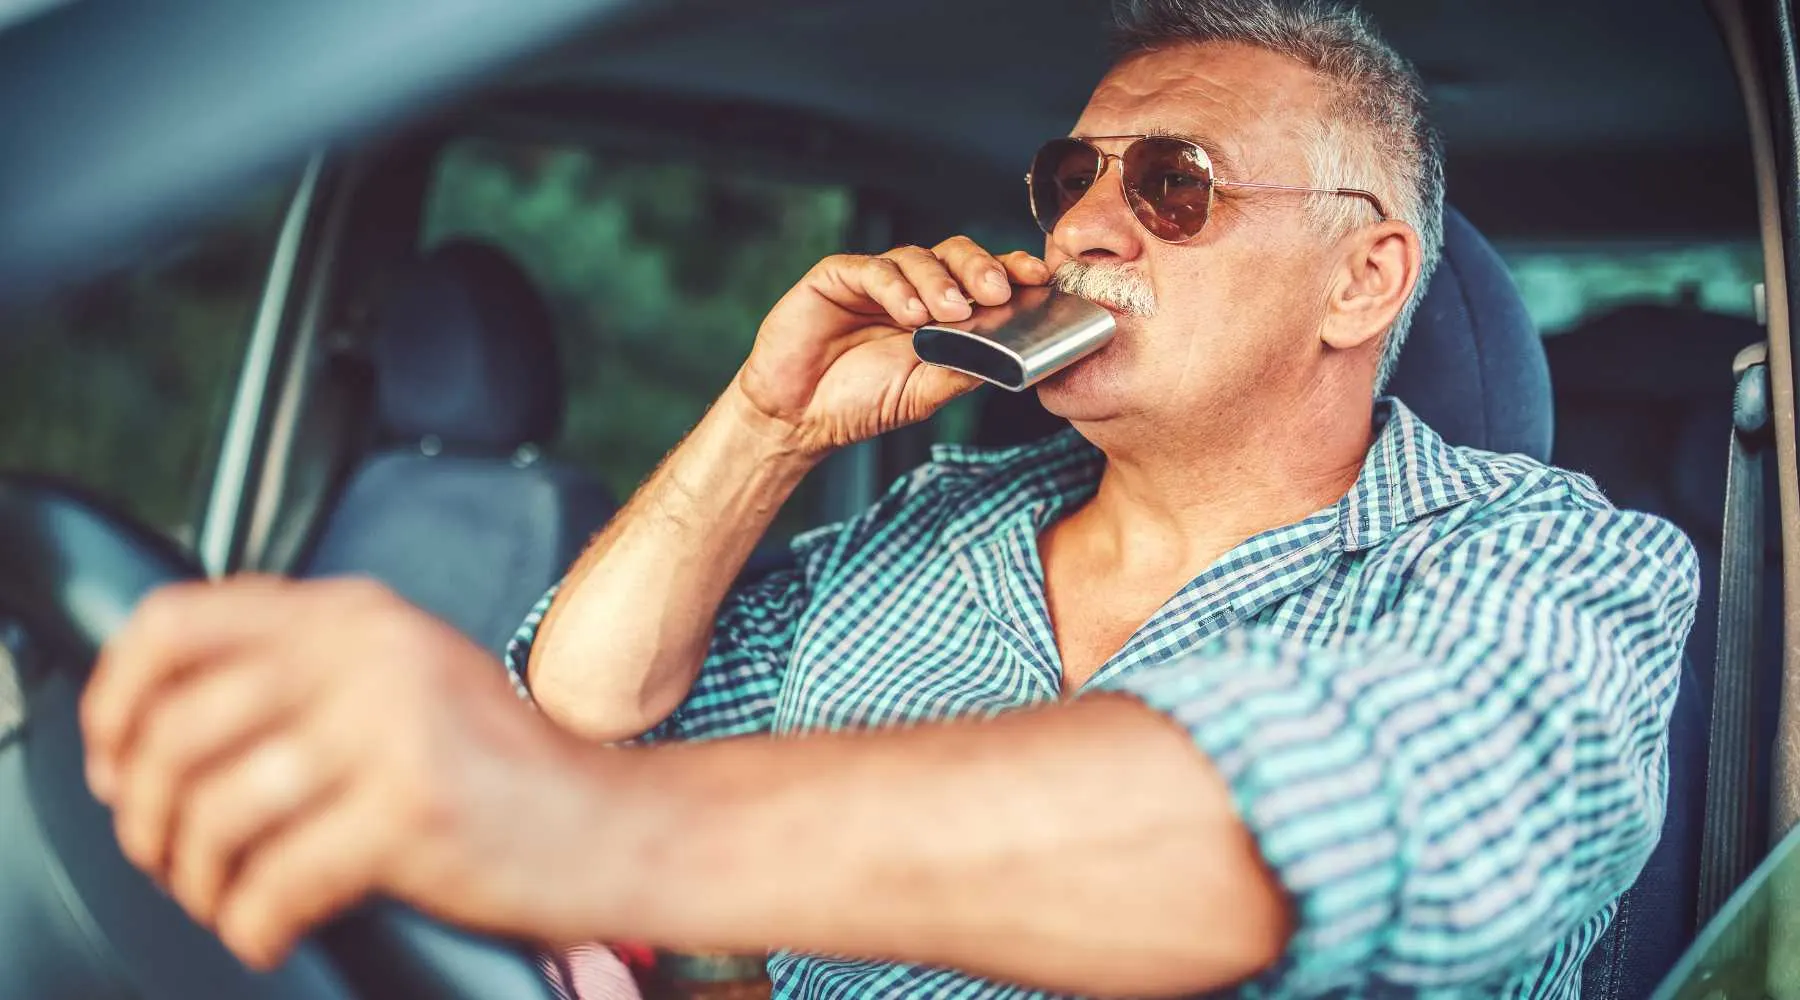 A man drinks alcohol while driving a car_Canva_1800x1000